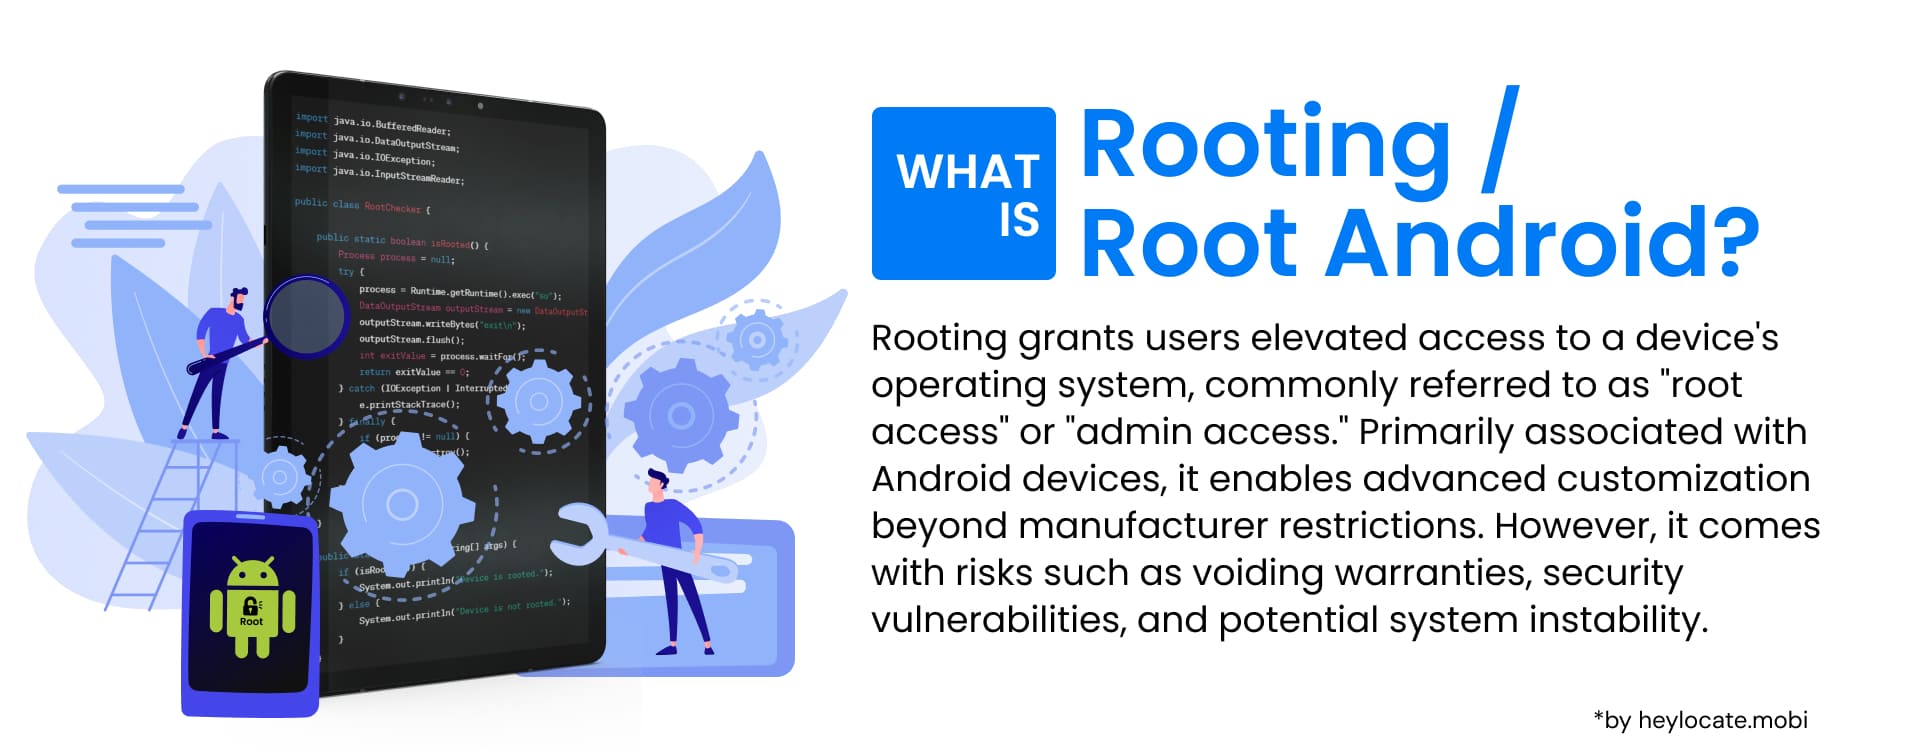 The infographic serves as a guide to the concept of "rooting" in Android devices, which involves obtaining privileged control known as "root access" over the device, allowing for extensive customization beyond the limits set by the manufacturer.